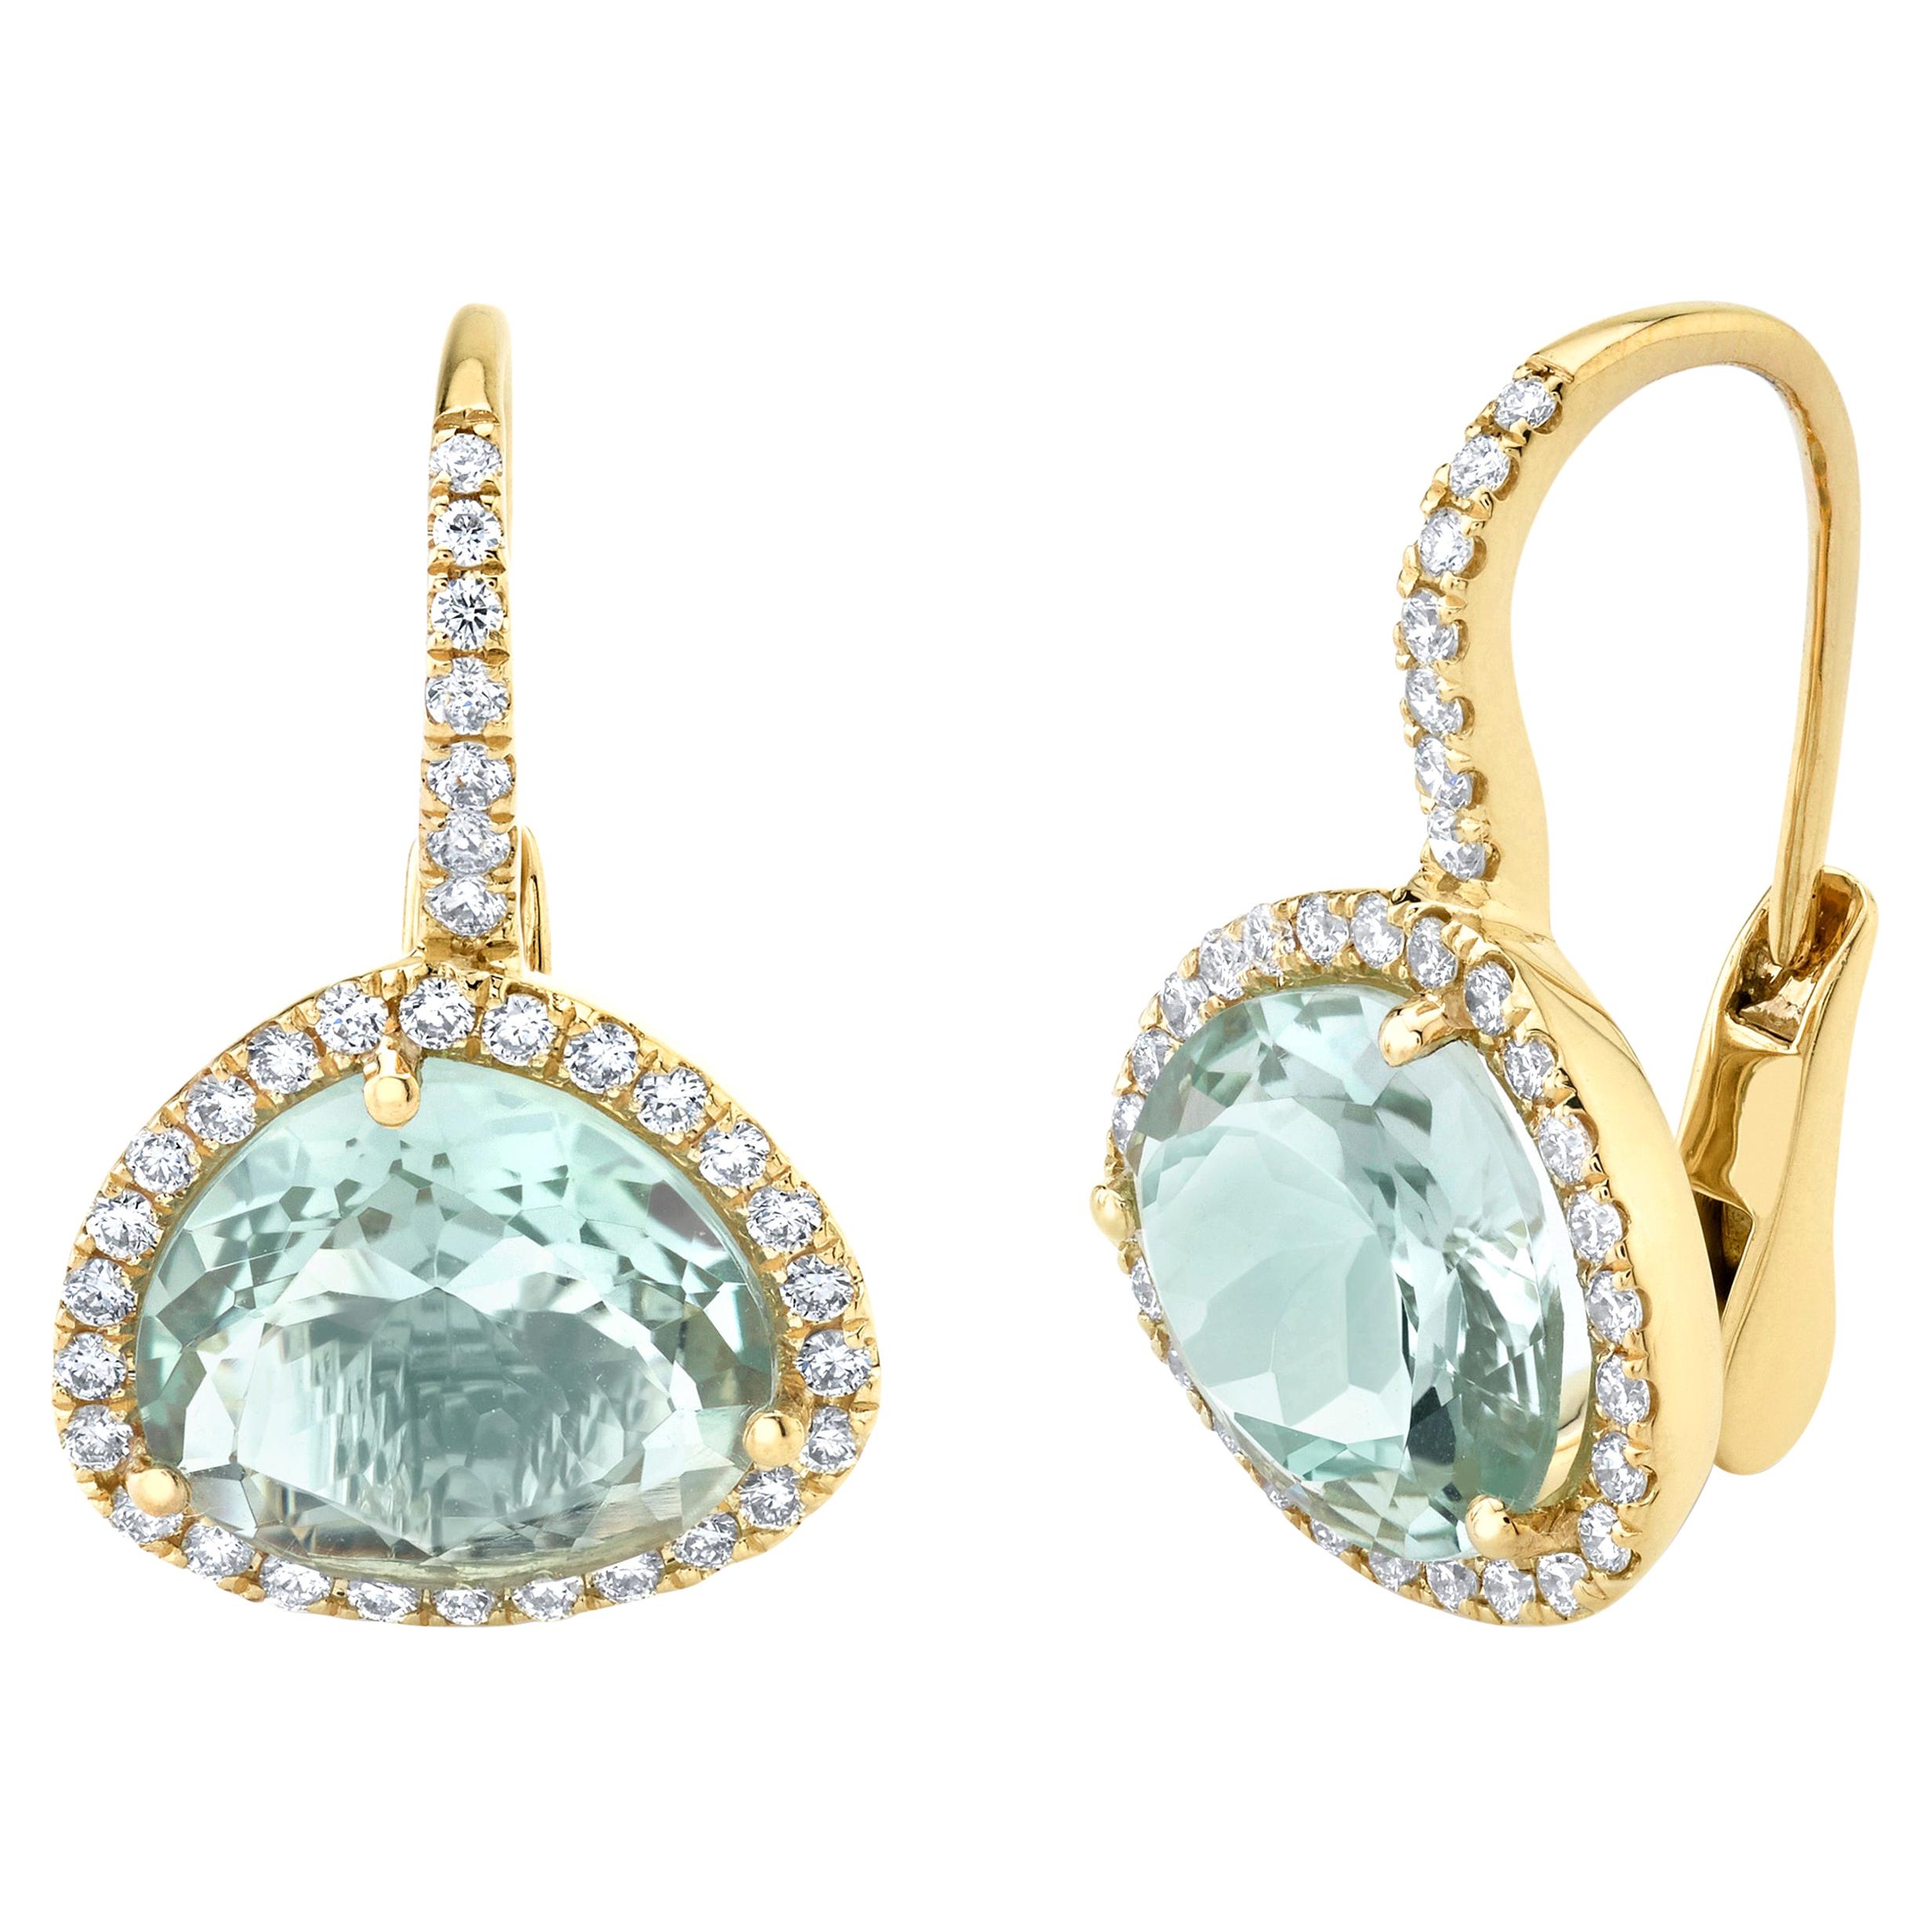 Blue Topaz and Diamond Halo Drop Earrings in Yellow Gold, 5.49 Carats Total For Sale